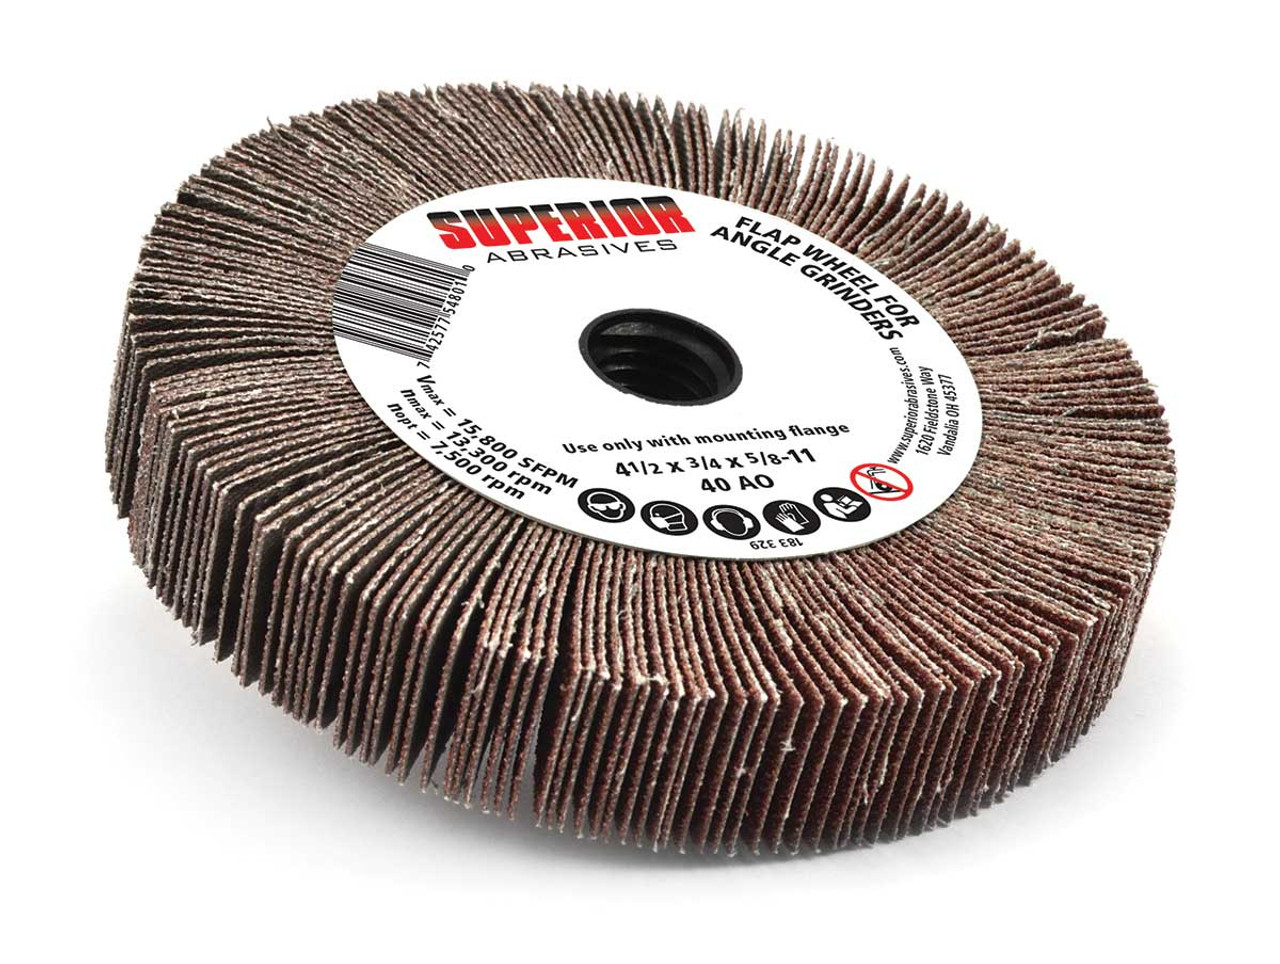 SHUR-KUT 4-1/2" x 3/4" x 5/8"-11 Aluminum Oxide Flap Wheel for Angle Grinder, 120 Grit PACKAGE OF 10